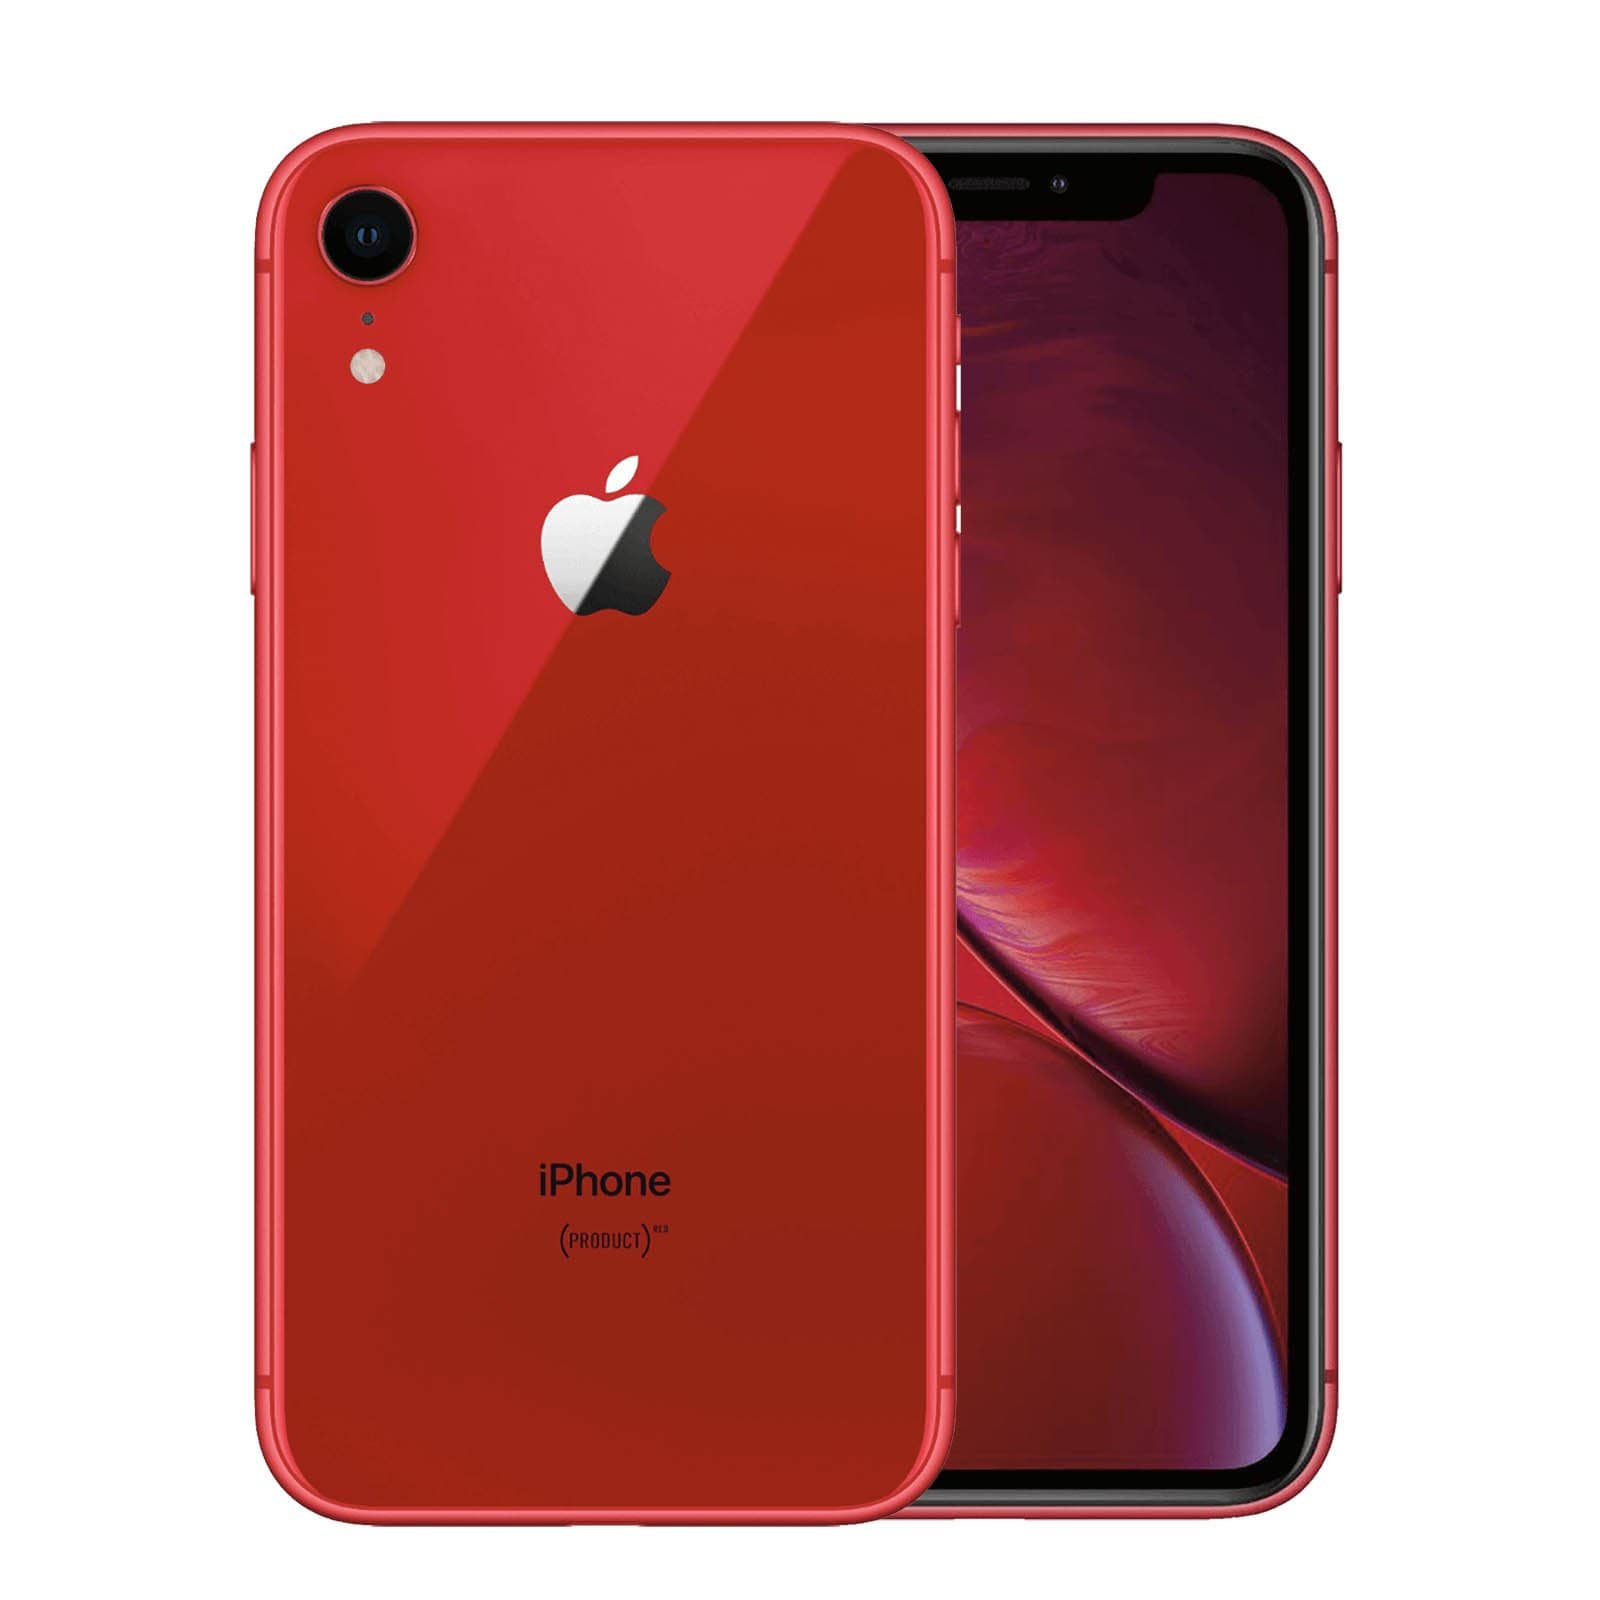 Apple iPhone XR 64GB Product Red Pristine - Unlocked 64GB Product Red Pristine